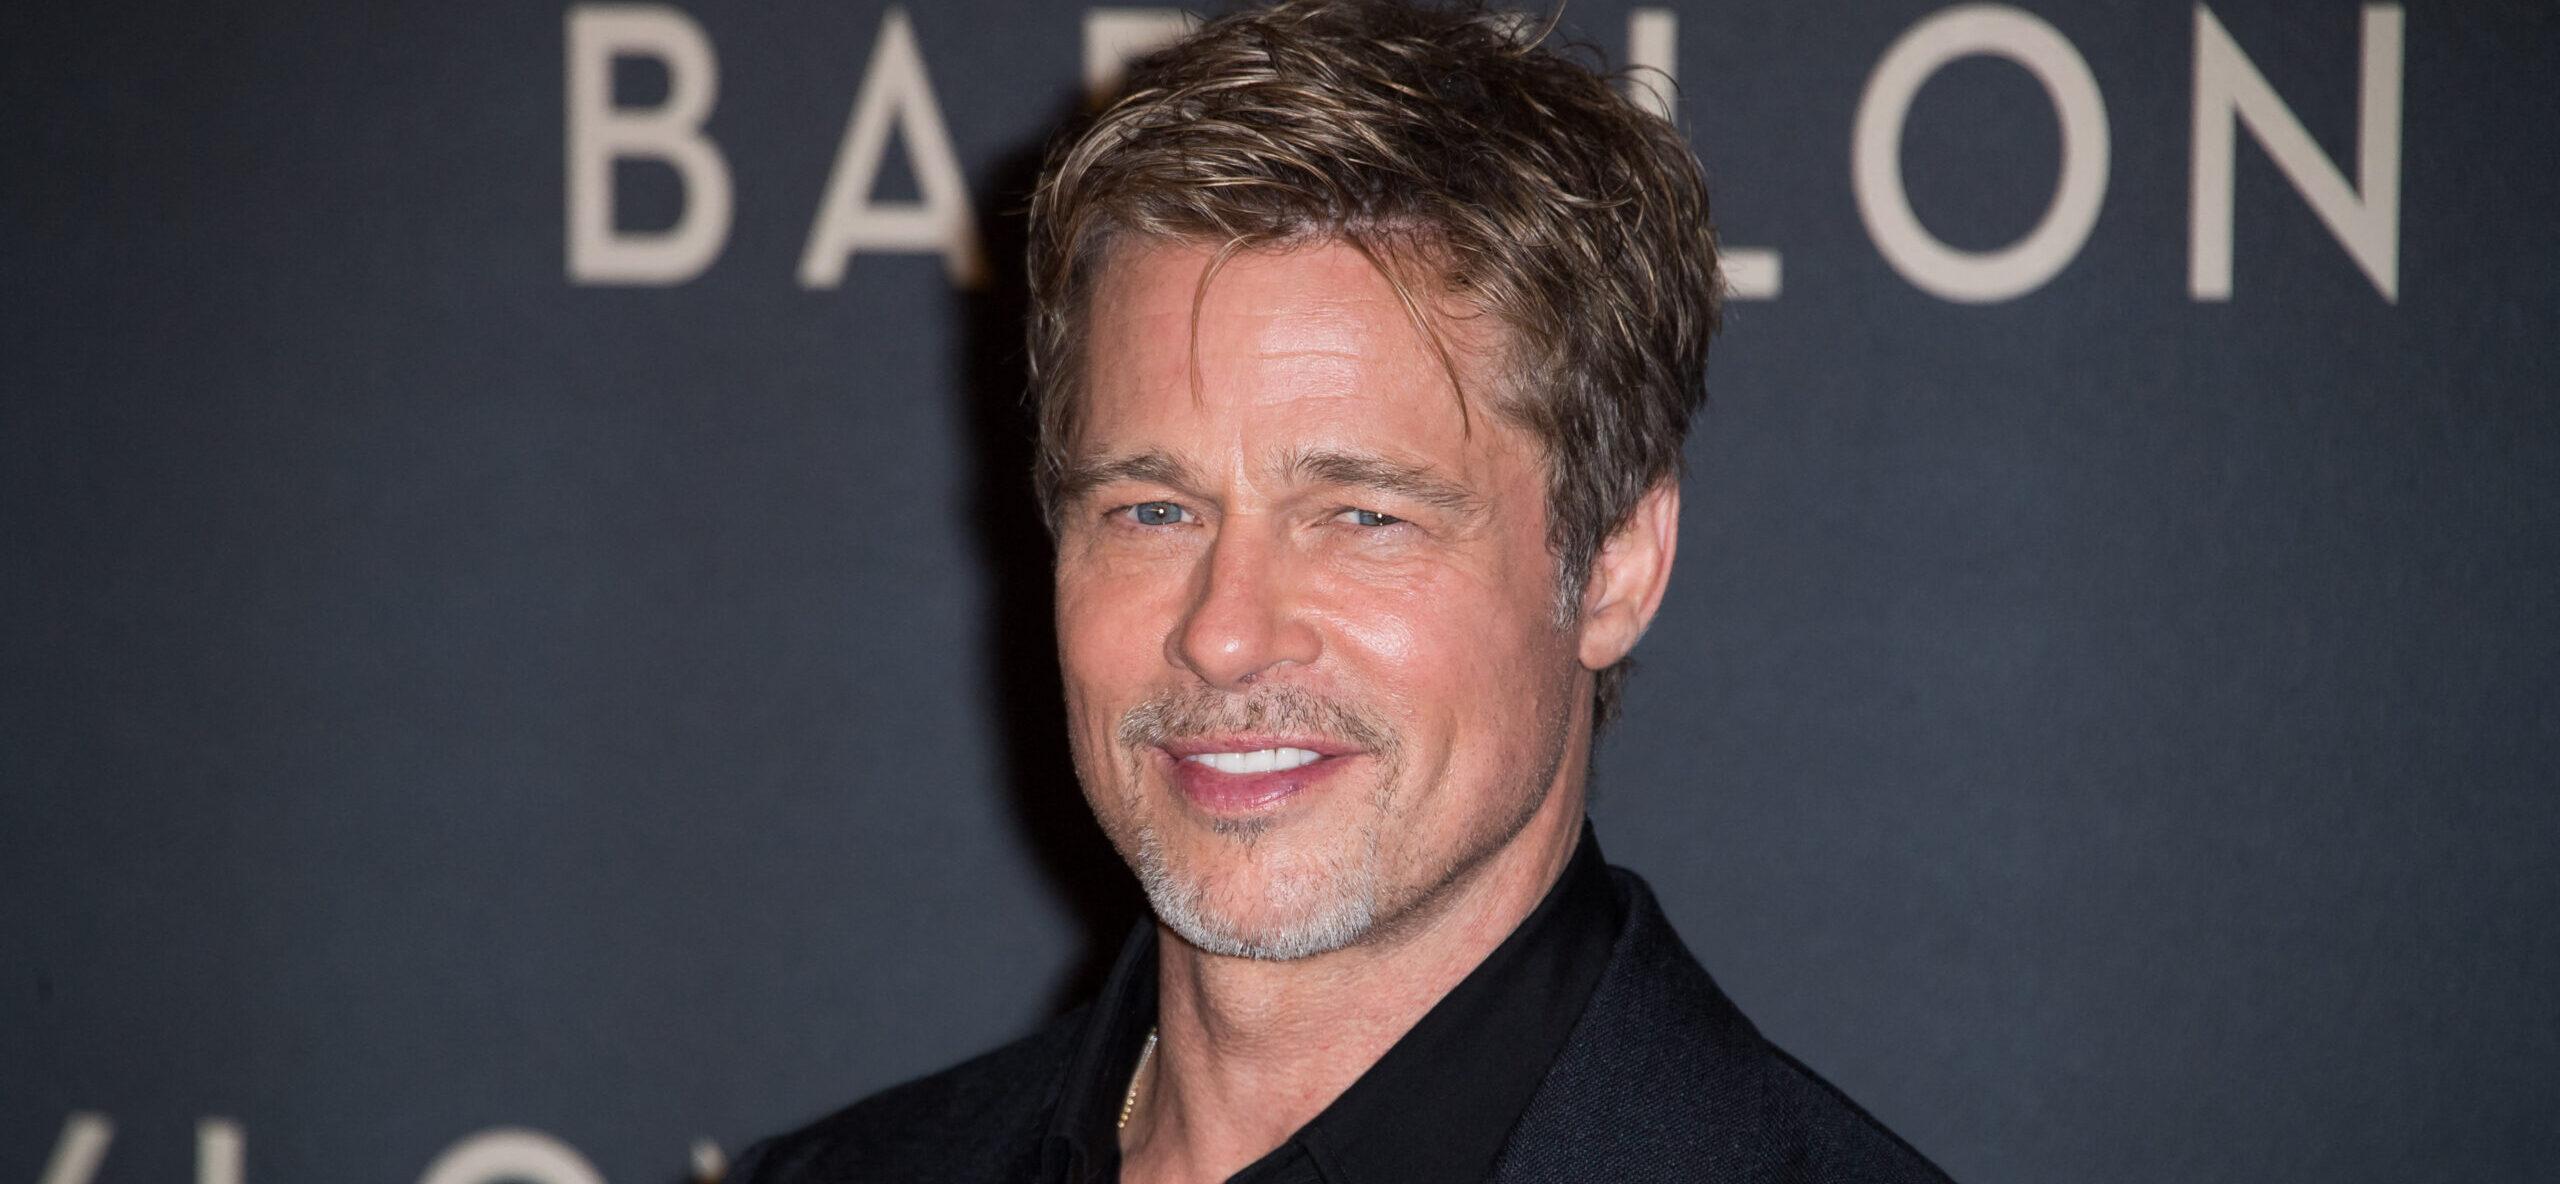 Hollywood actor Brad Pitt launches The Gardener gin, adding to